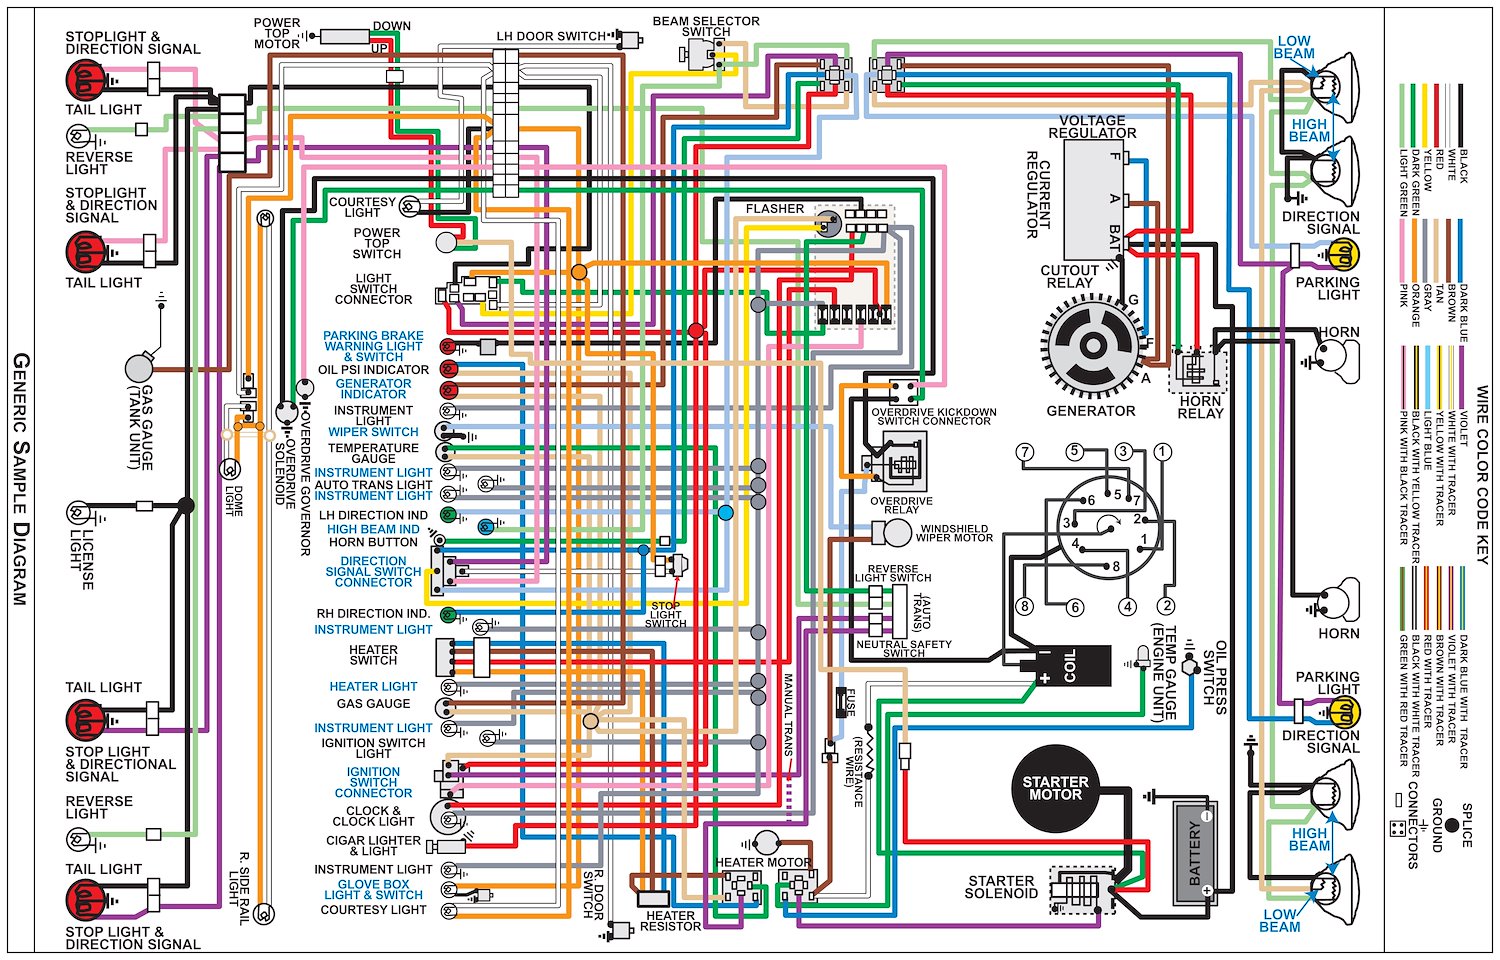 Wiring Diagram for 1973 Dodge B Series Trucks, 11 in x 17 in., Laminated